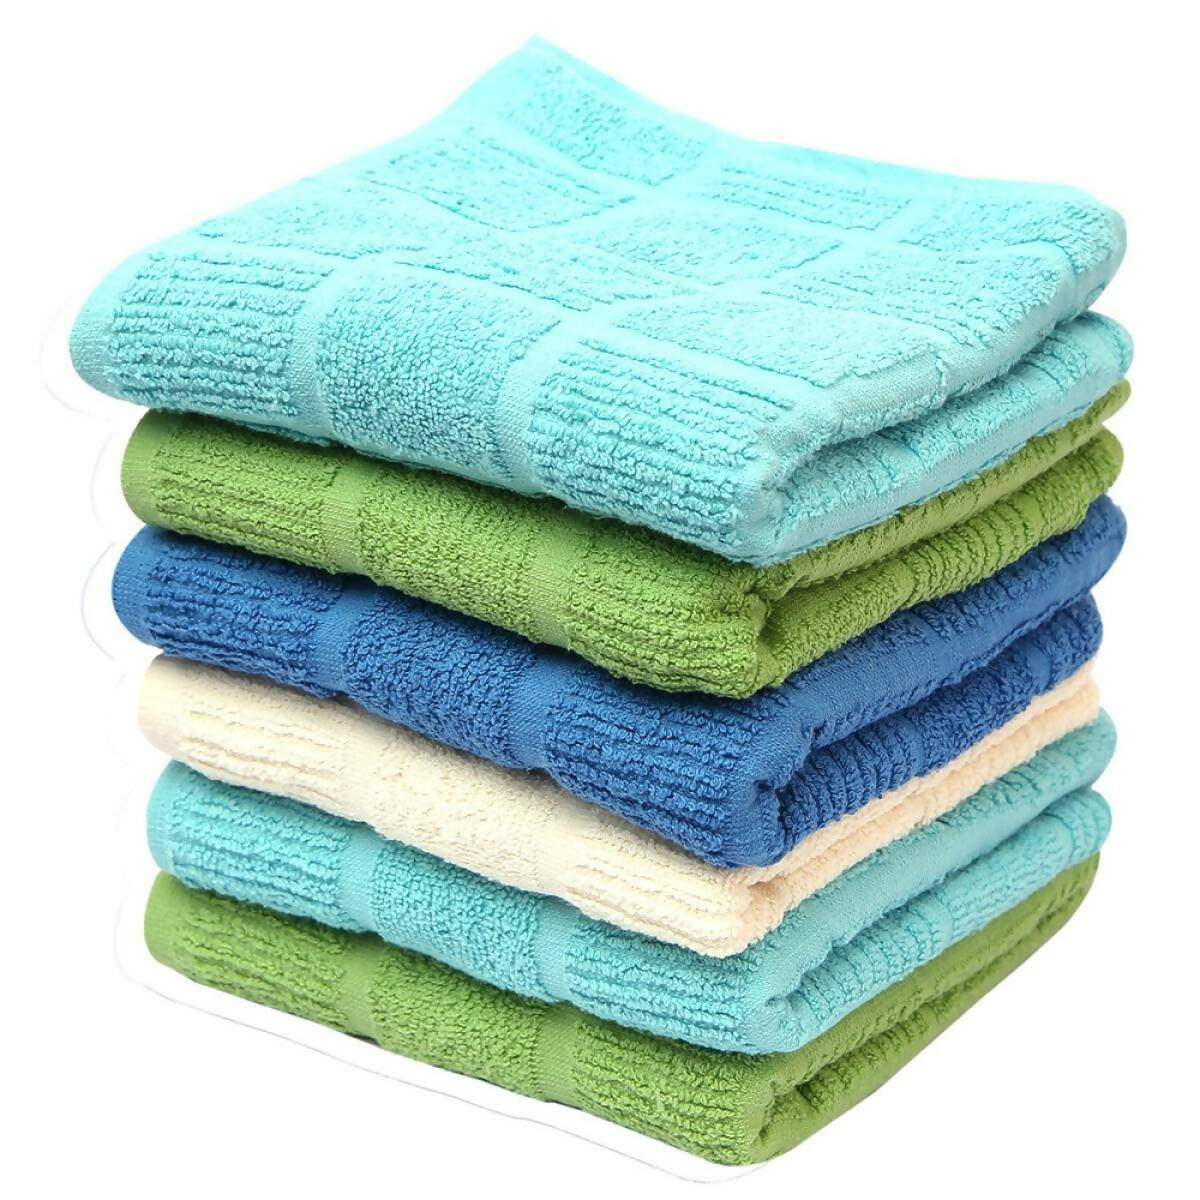 Hand Towel 6 Pcs Set Soft and Smooth 16 x 27 Inch